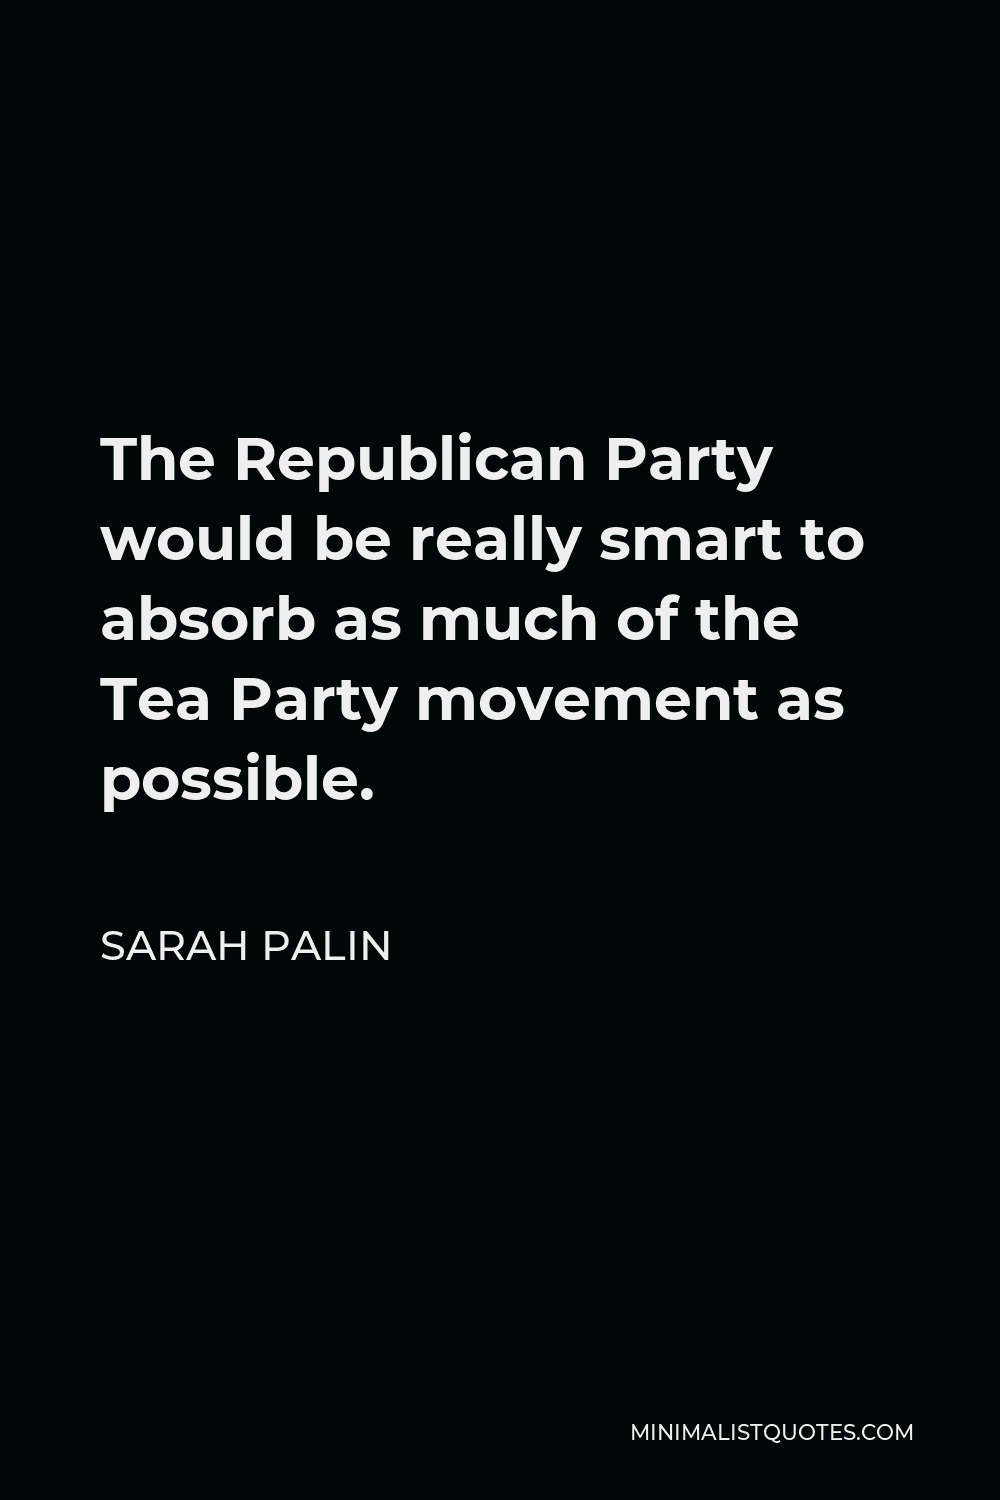 Sarah Palin Quote - The Republican Party would be really smart to absorb as much of the Tea Party movement as possible.